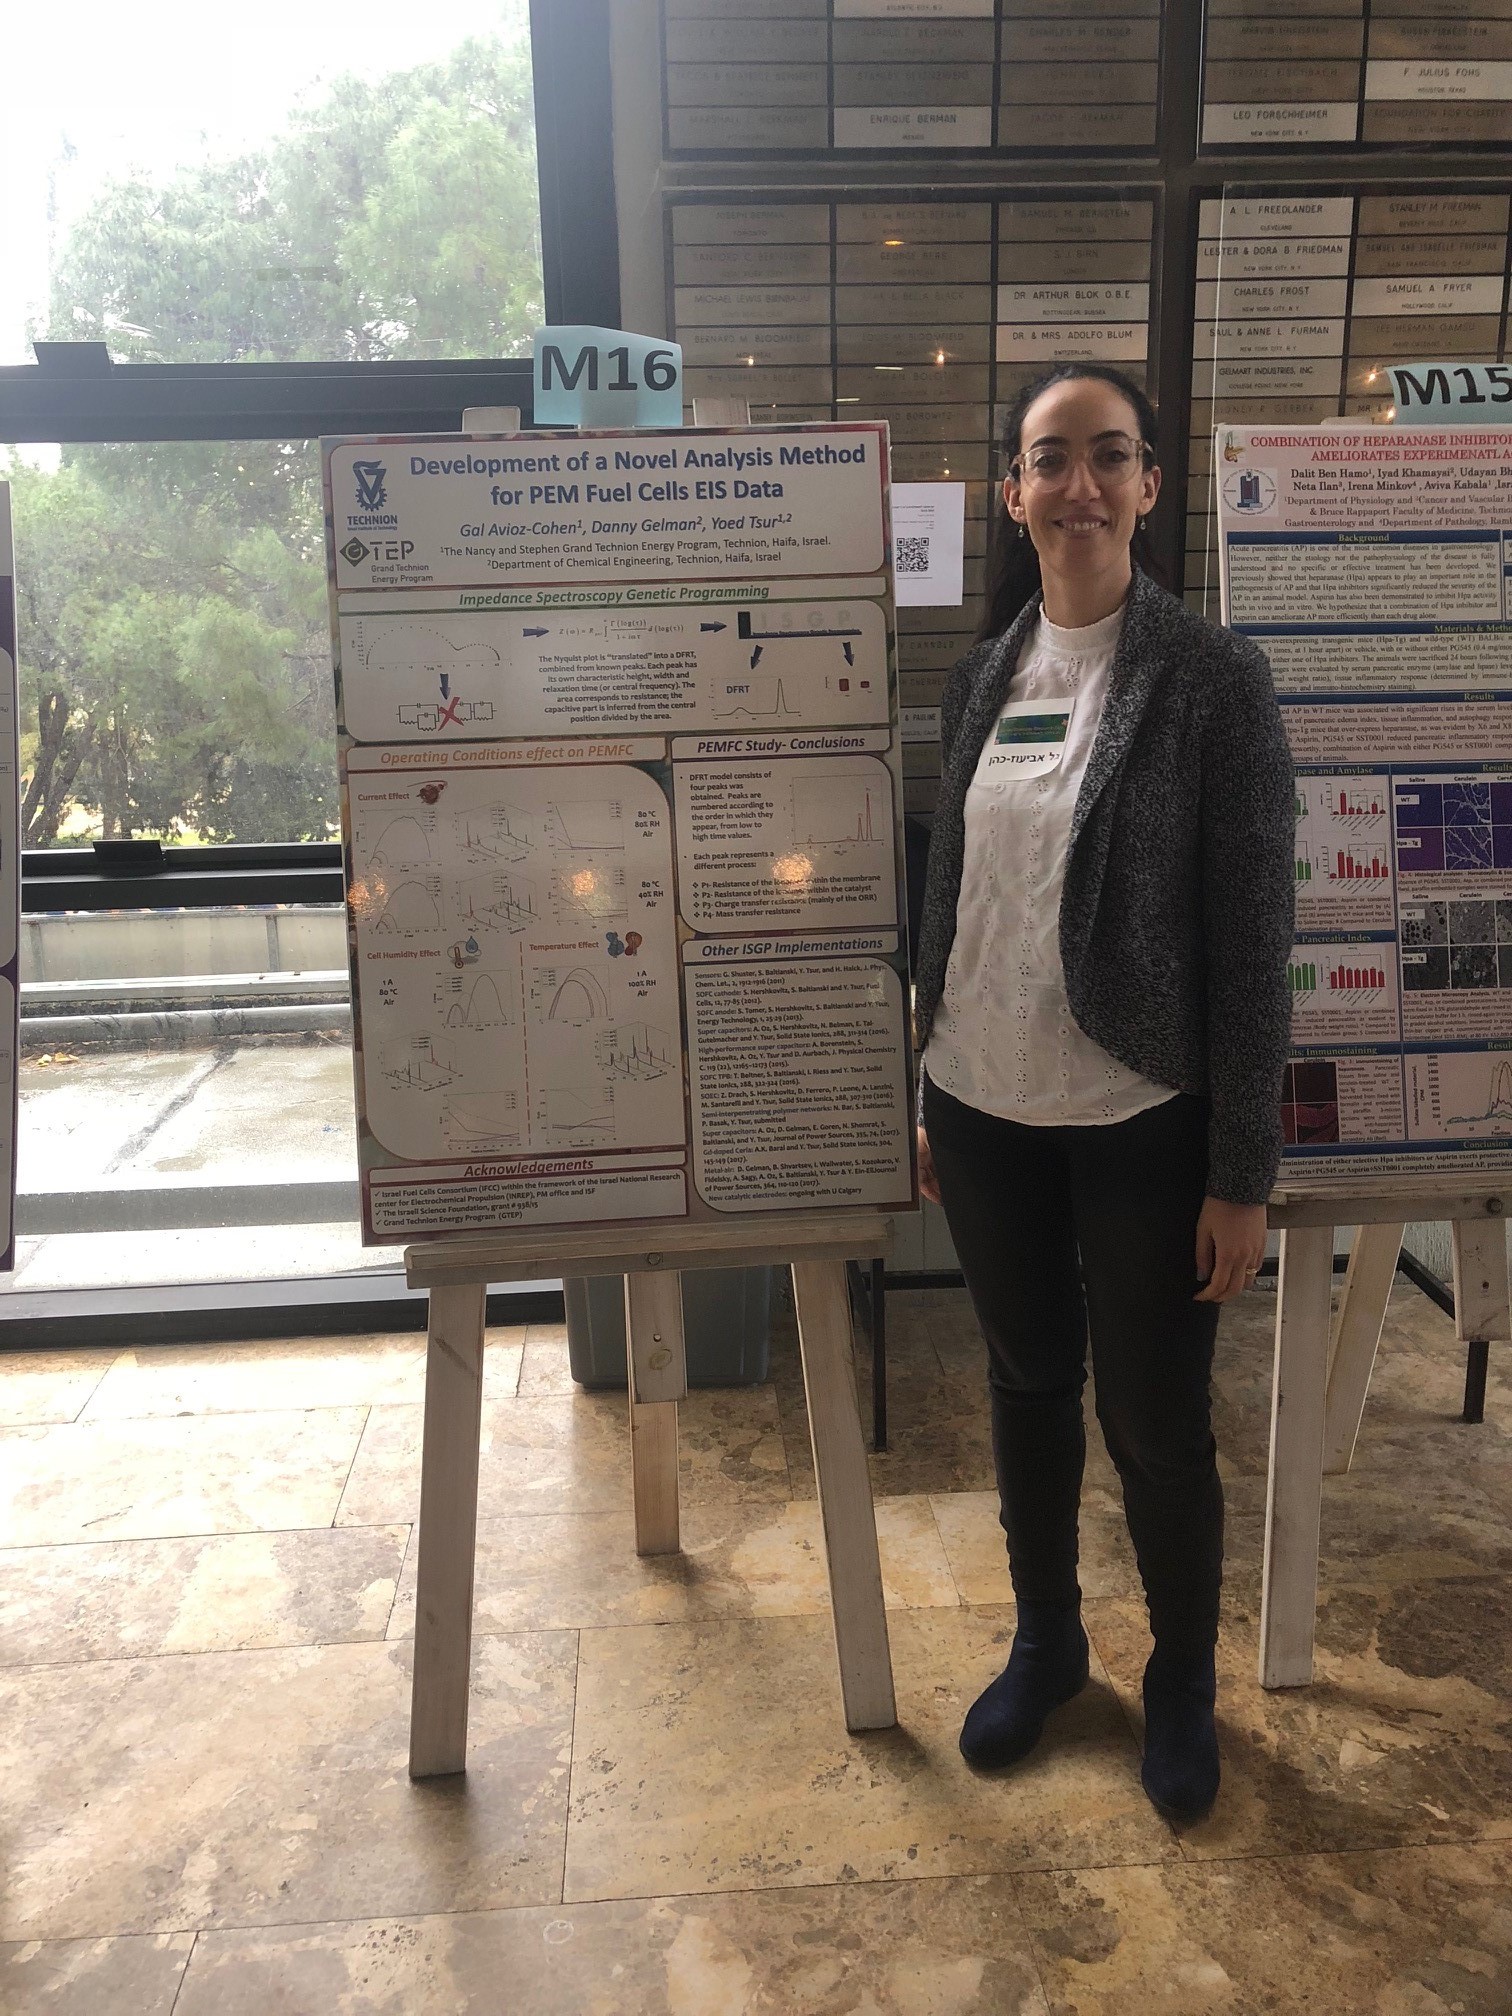 Gal presenting a poster at Graduate School Research Day 16.1.2019